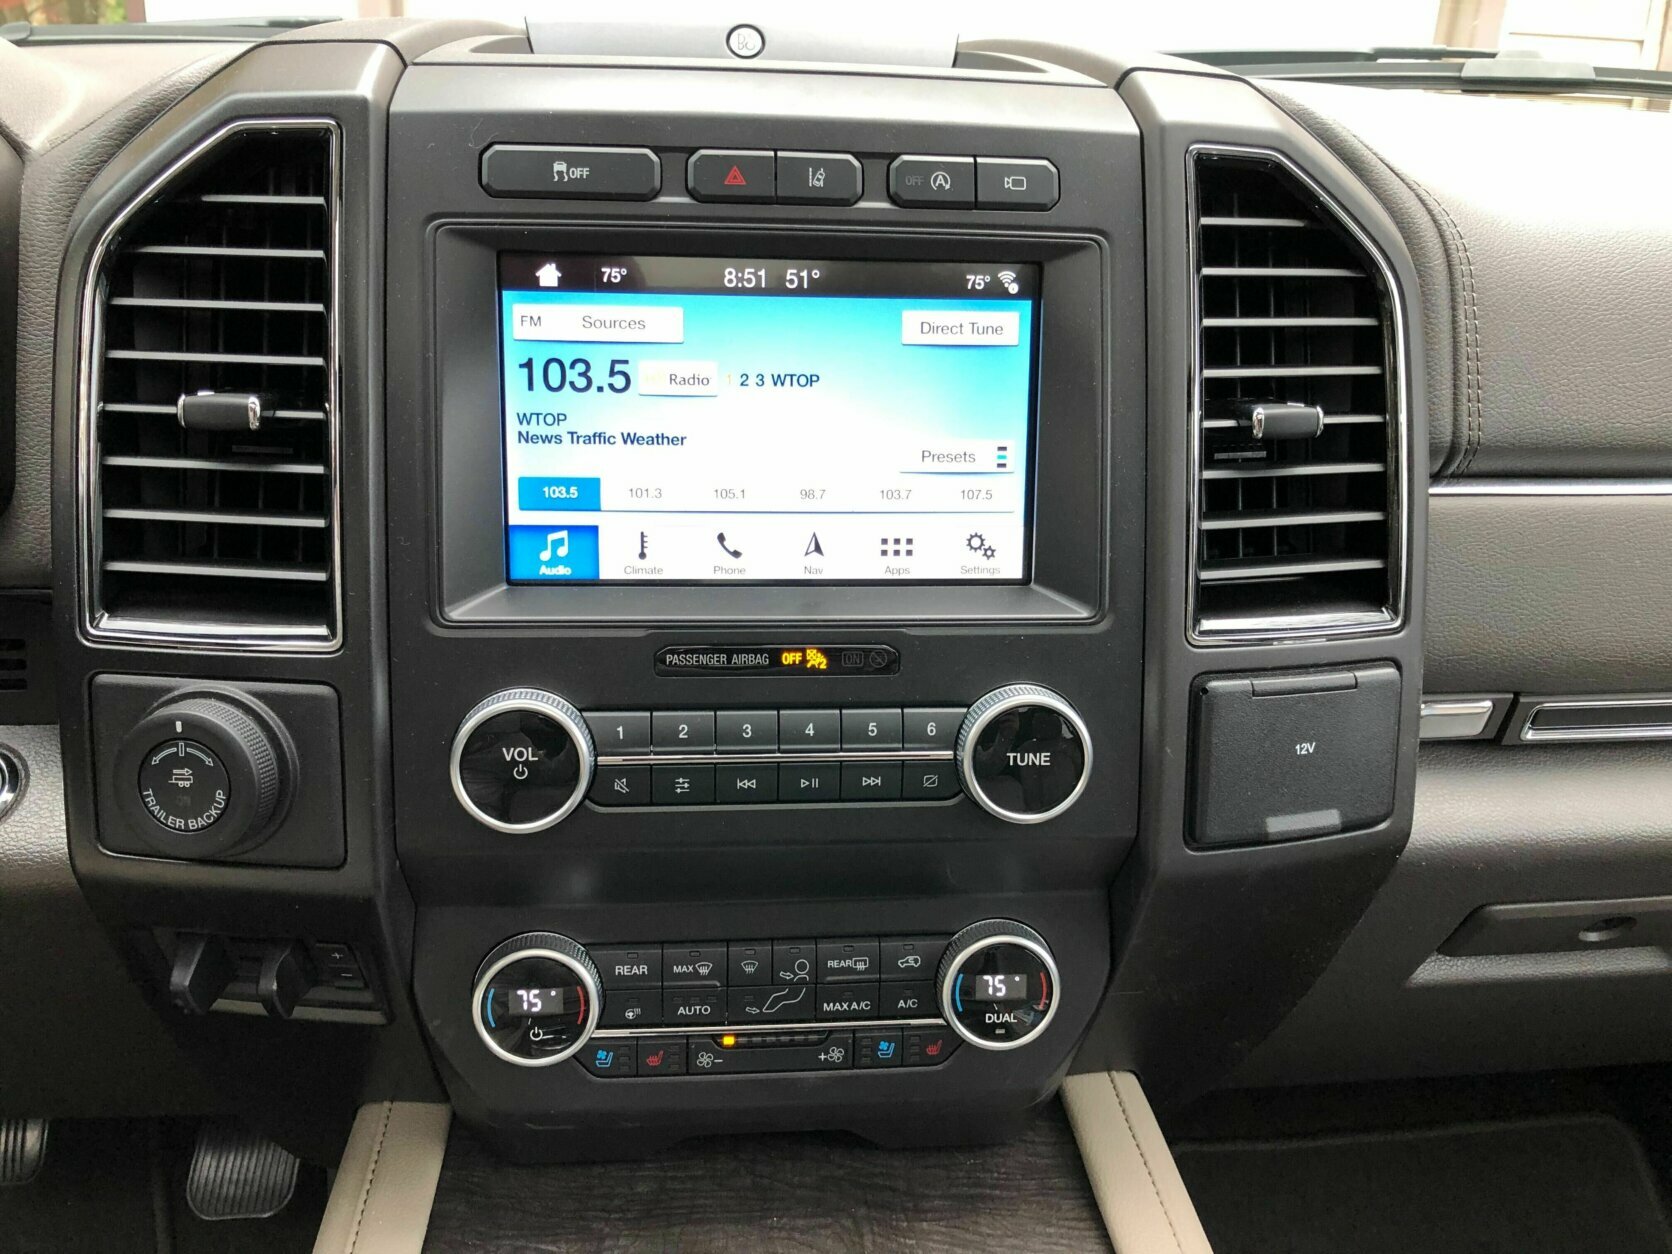 Large touch screen with large knobs make for easy NAV and radio controls. 